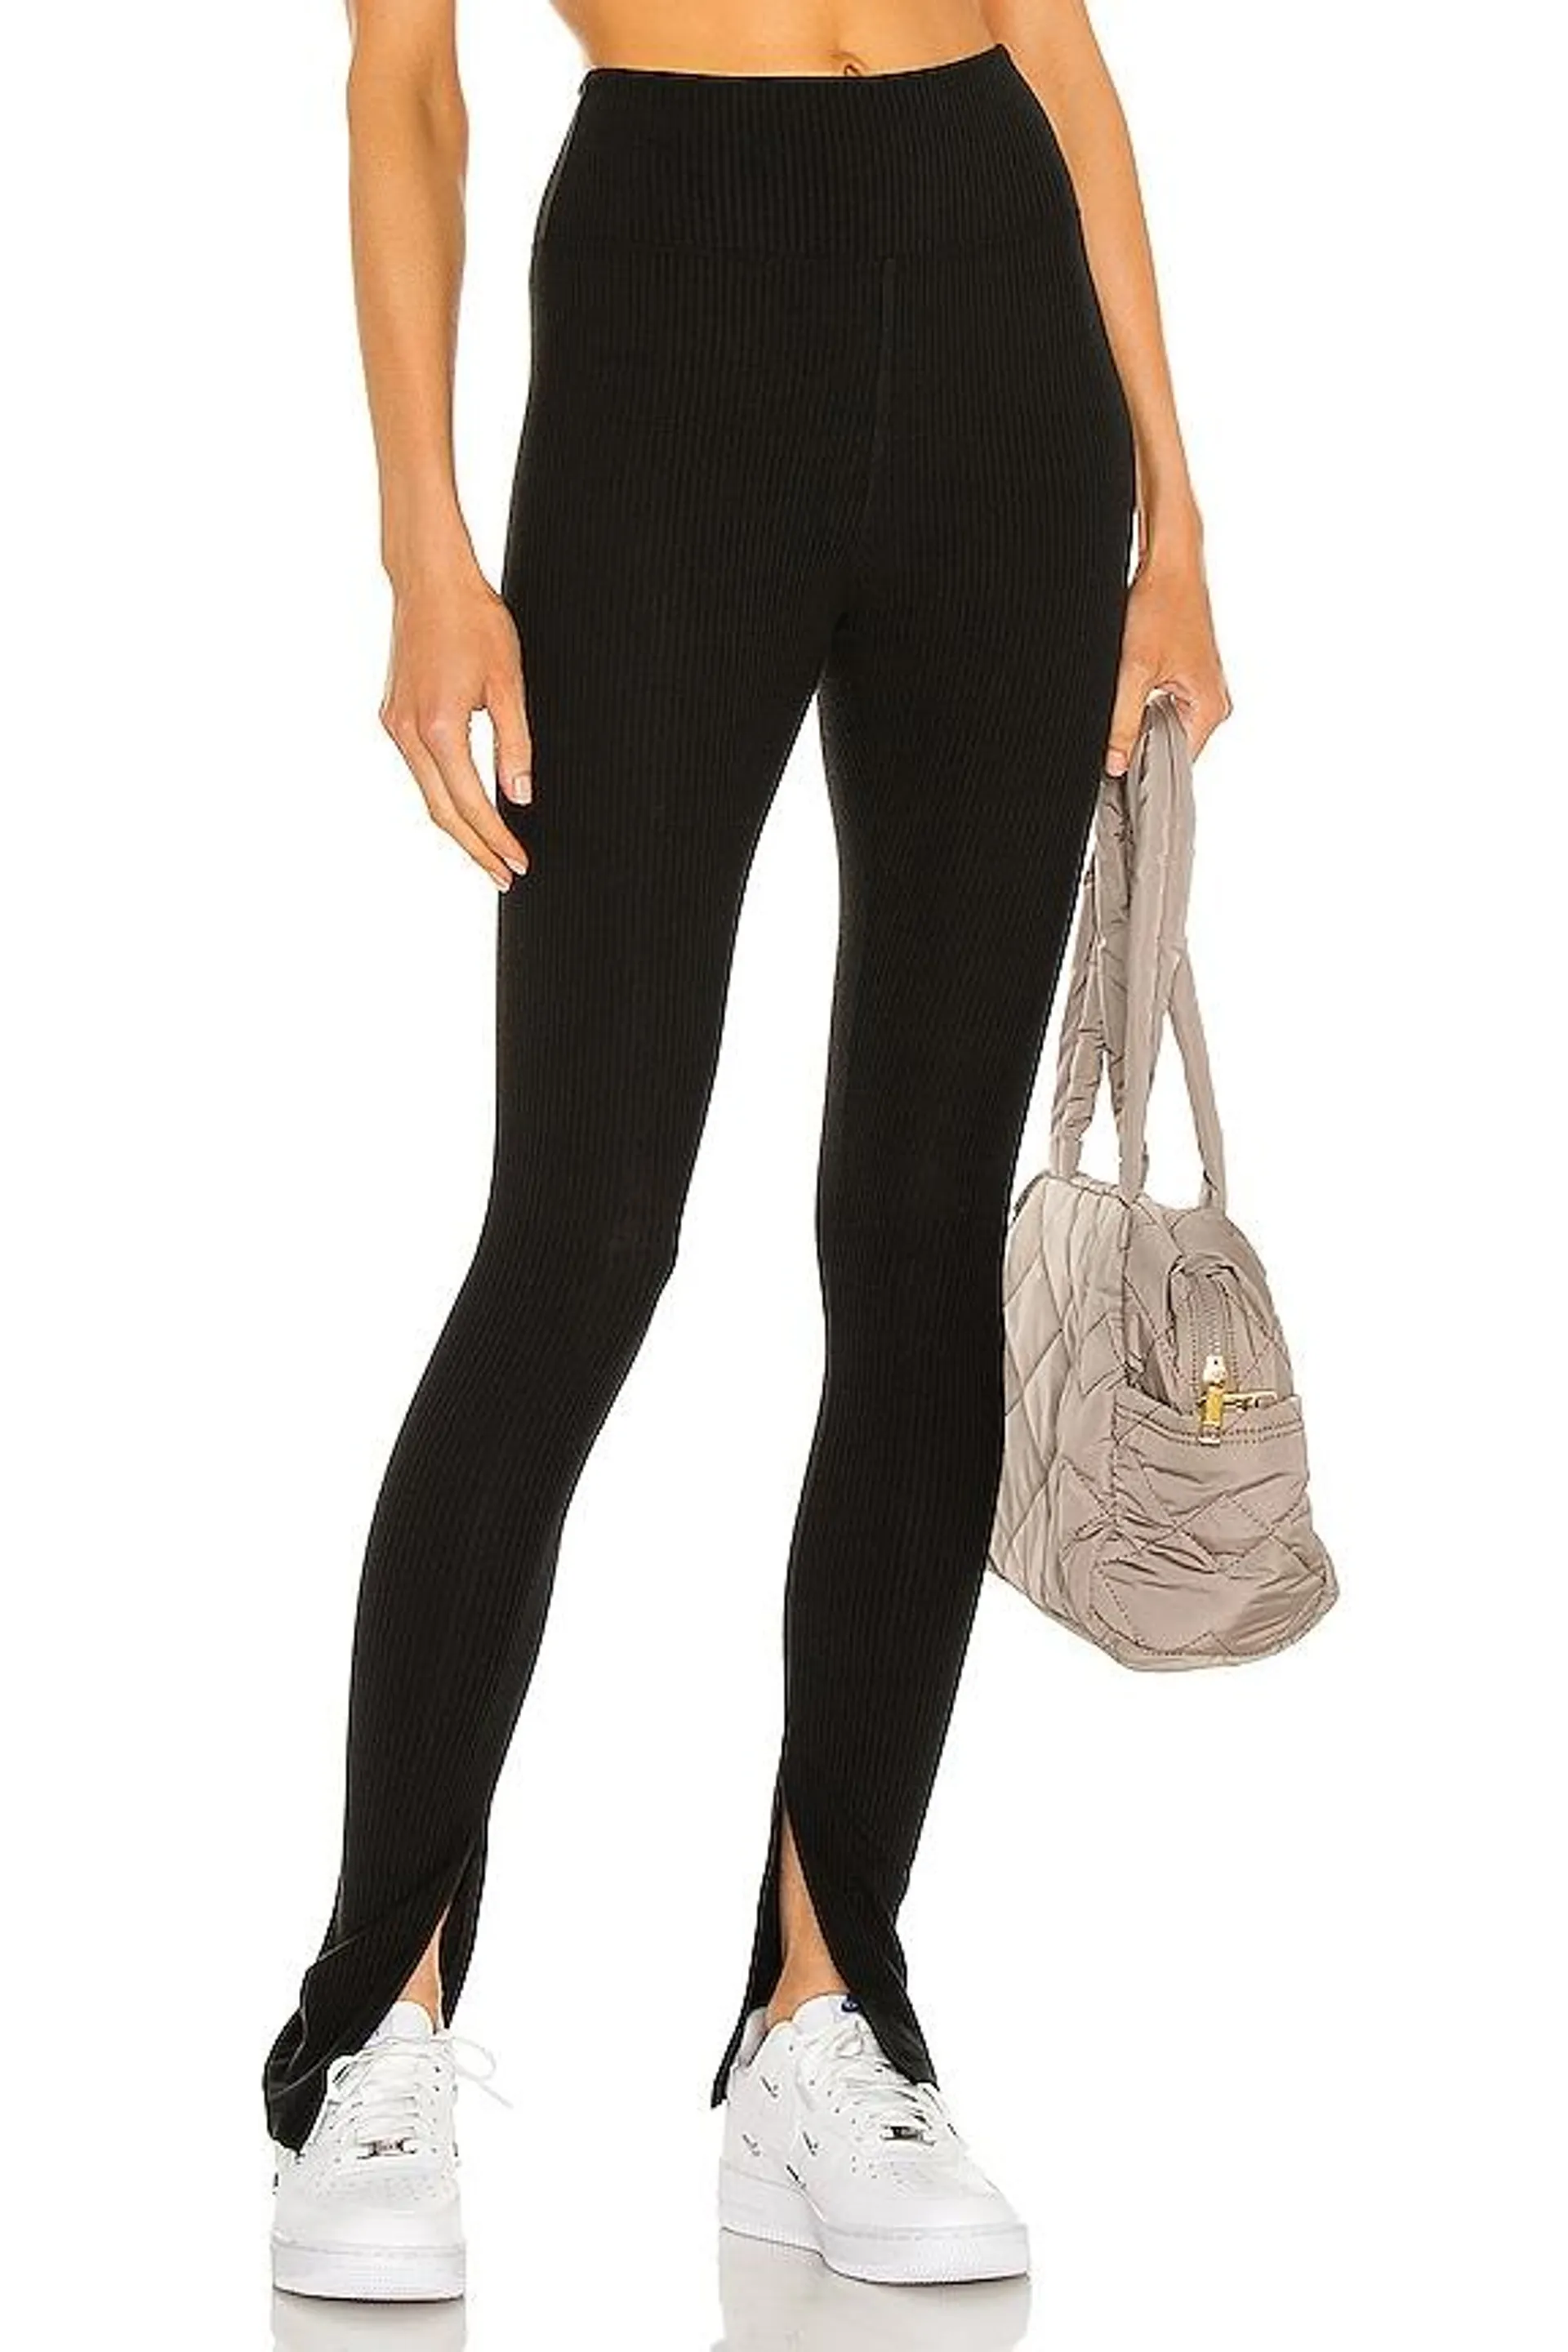 favorite YEAR OF OURS 9 To 5 Slit Pant in Black